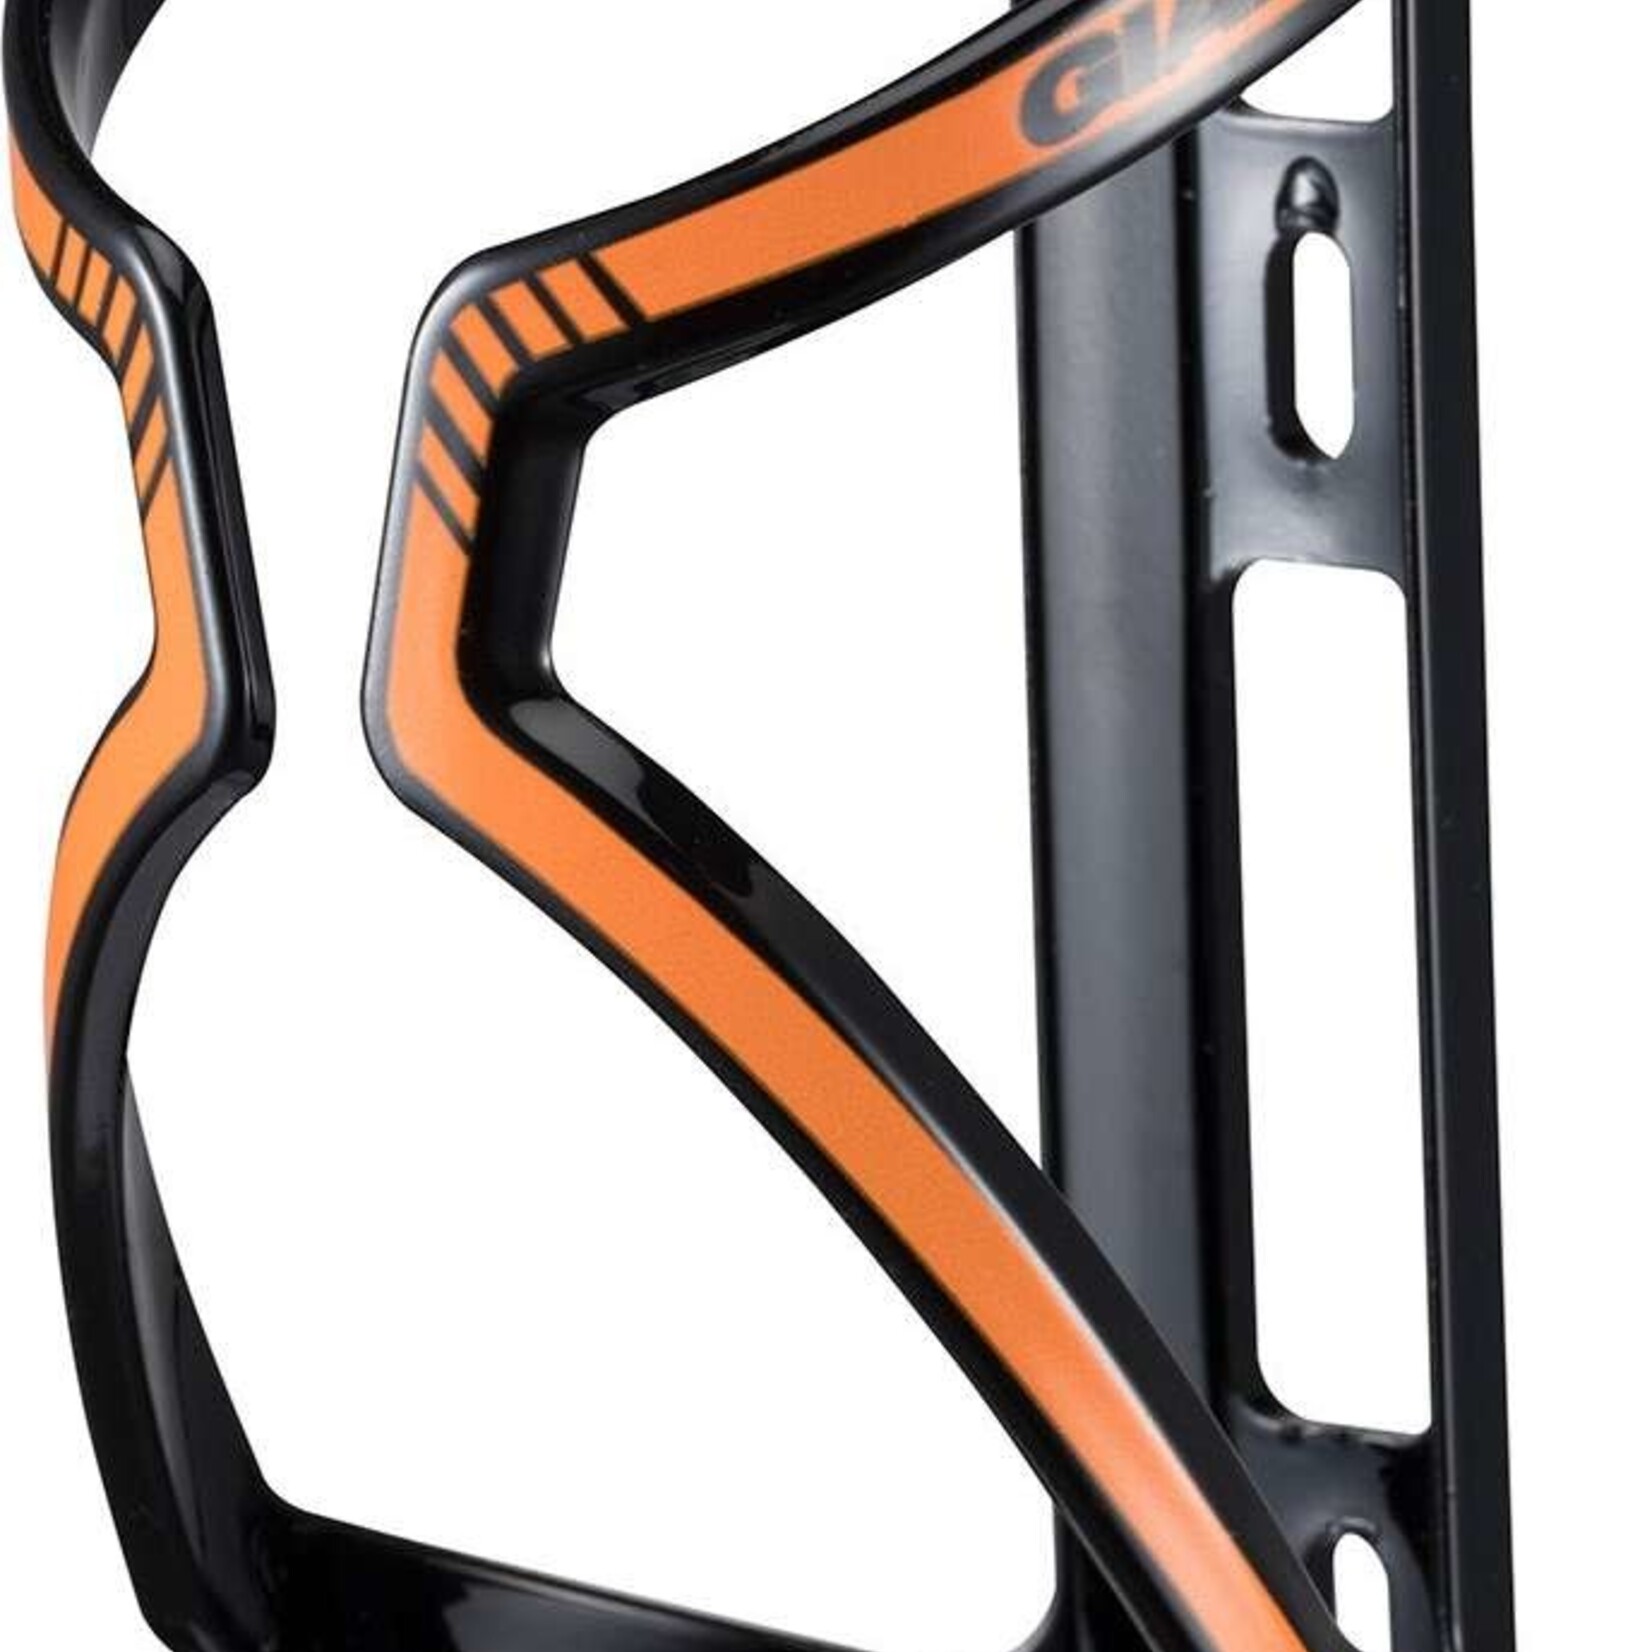 Giant Giant Water Bottle Cage, Airway